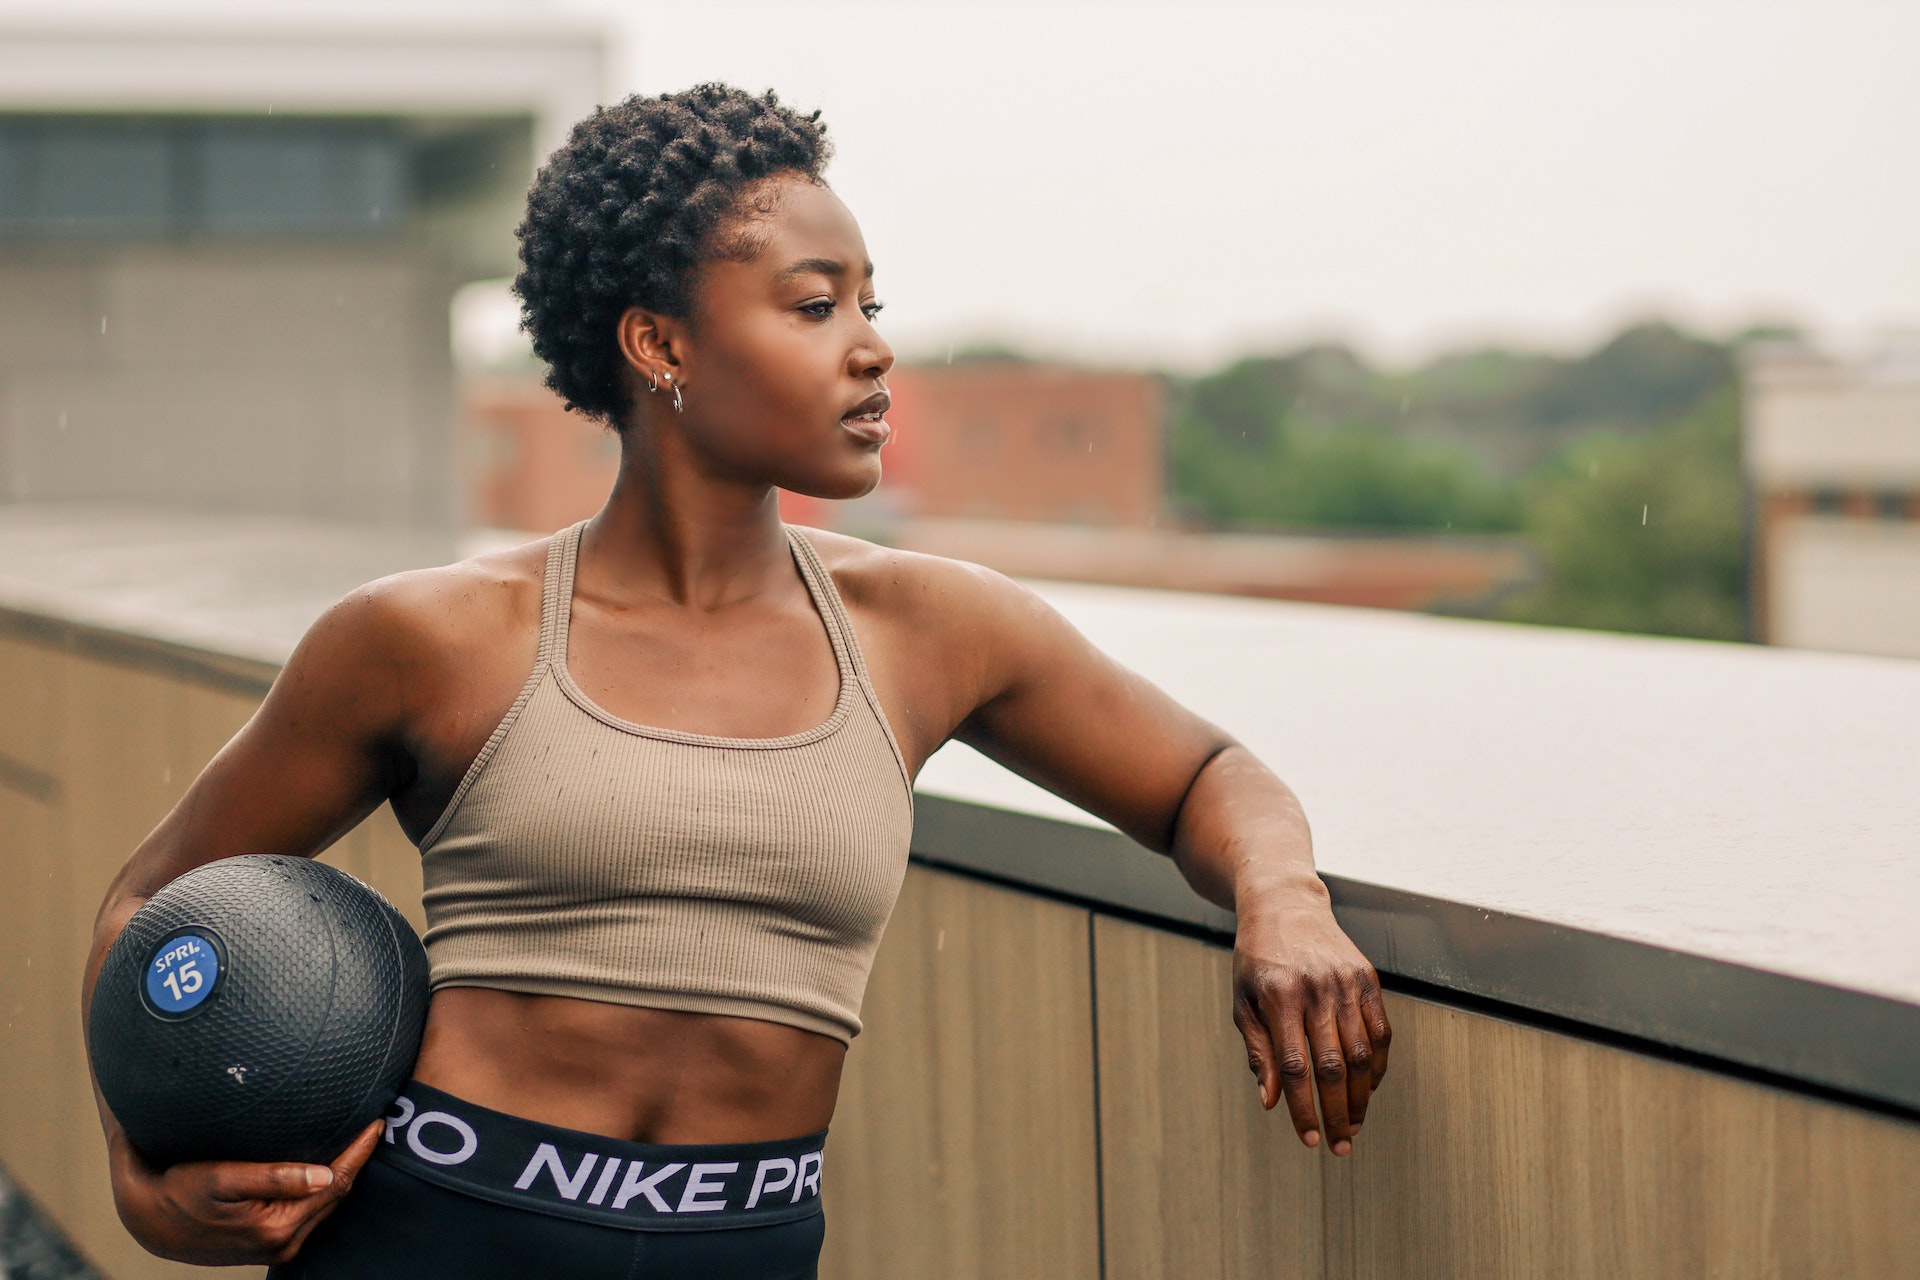 Find the perfect sports bra for your workout